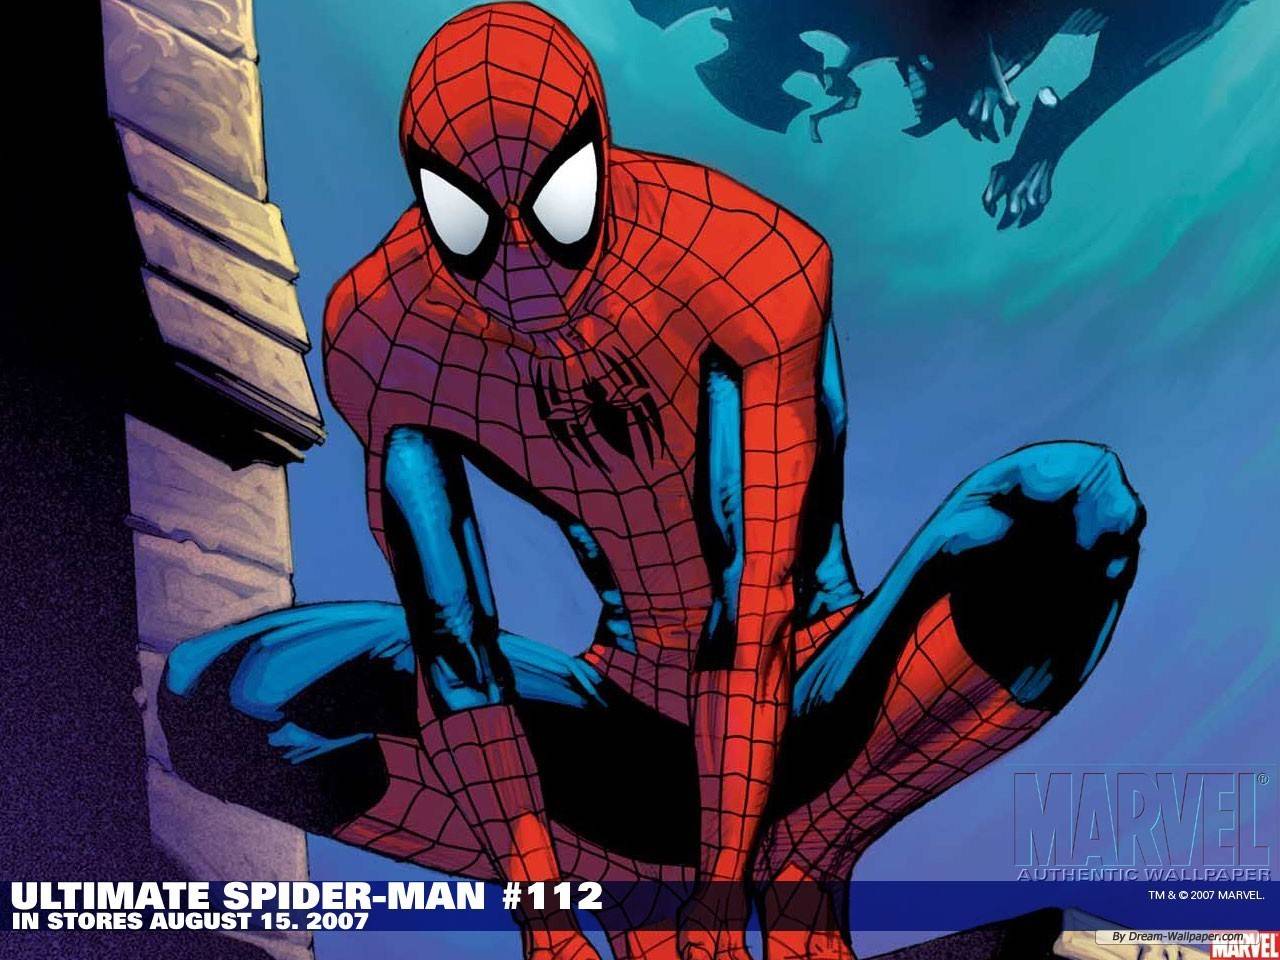 Spiderman Cartoon Wallpapers - Free Android Application ...